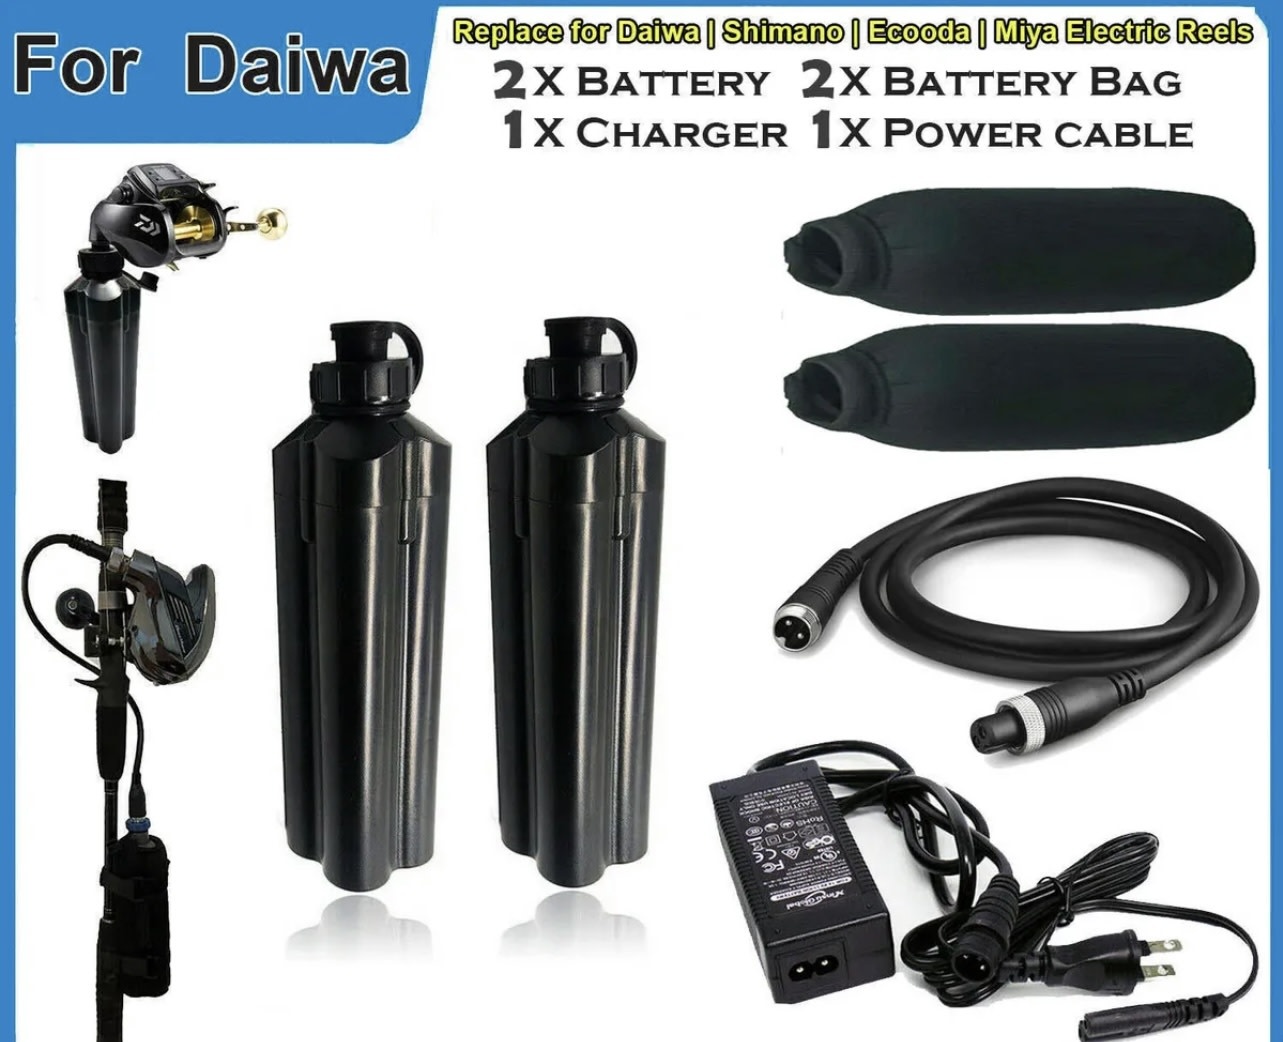 Lithium-ion Battery Tanacom 18Ah 14.8V 5000mAh Electric Reel Battery 2pk w/ battery bag, cable, Charger Kit in Bag - Angler's Choice Tackle